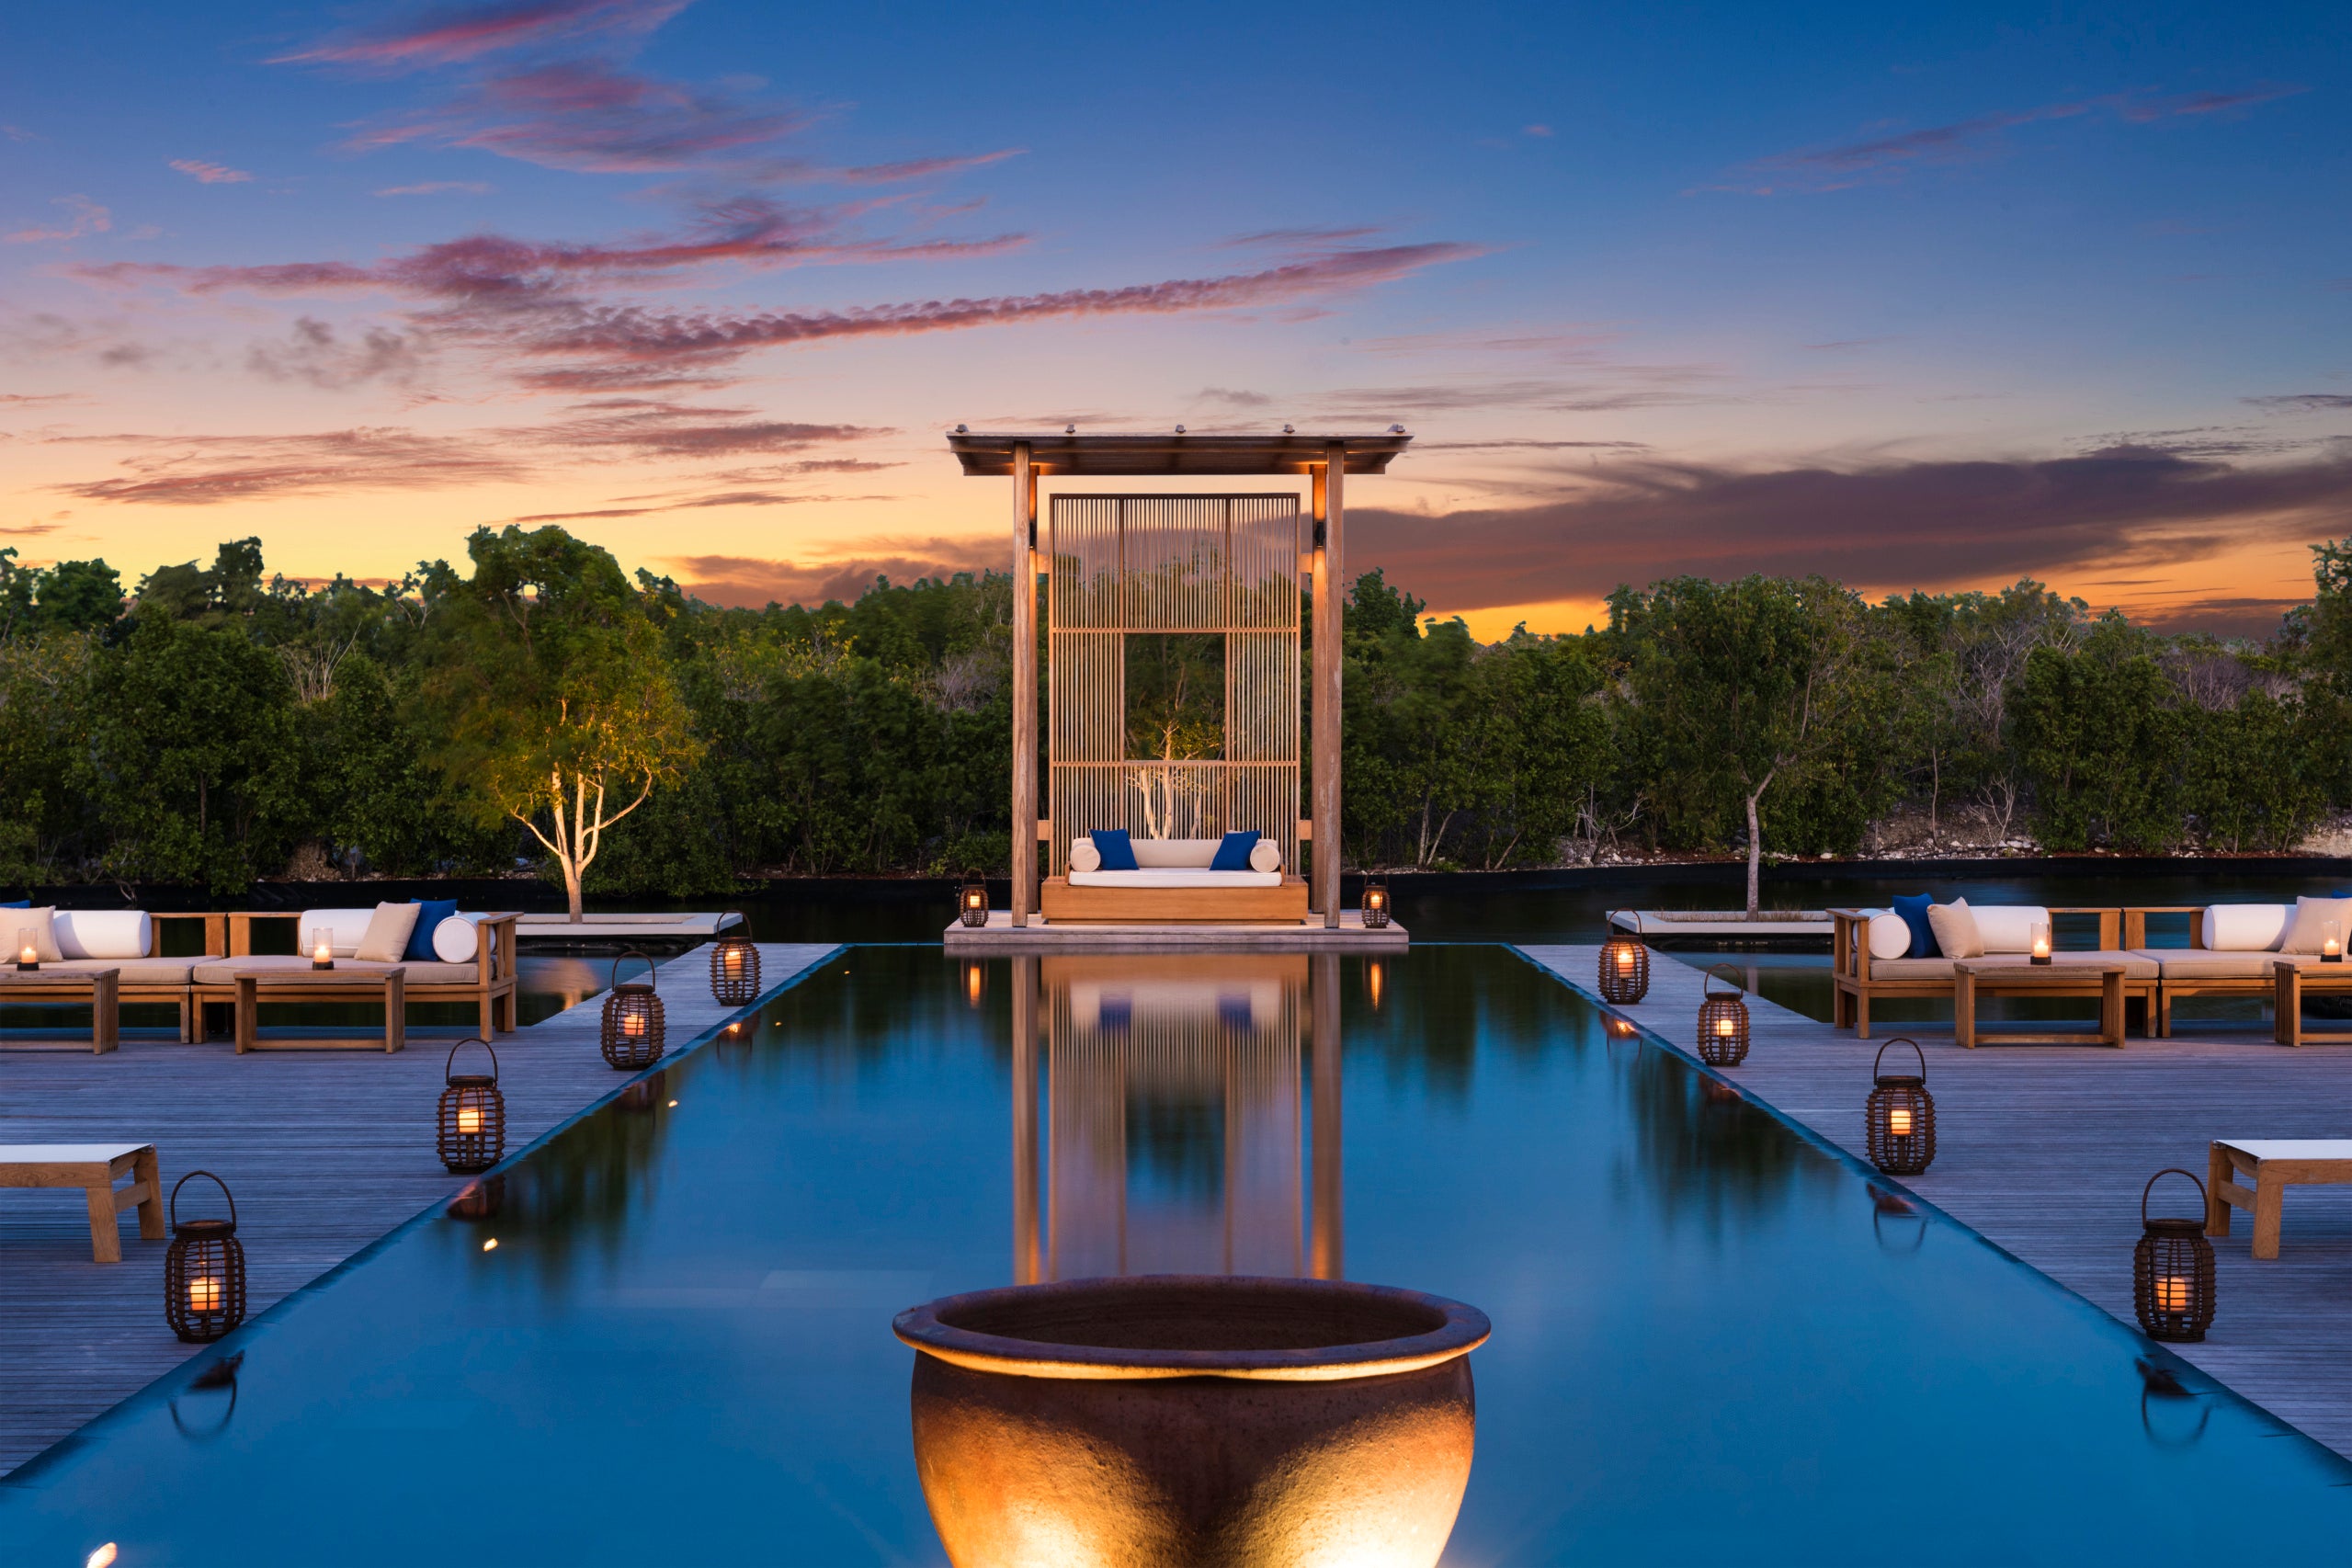 Indulge in island-inspired spa treatments at Amanyara on the Turks & Caicos island of Providenciales